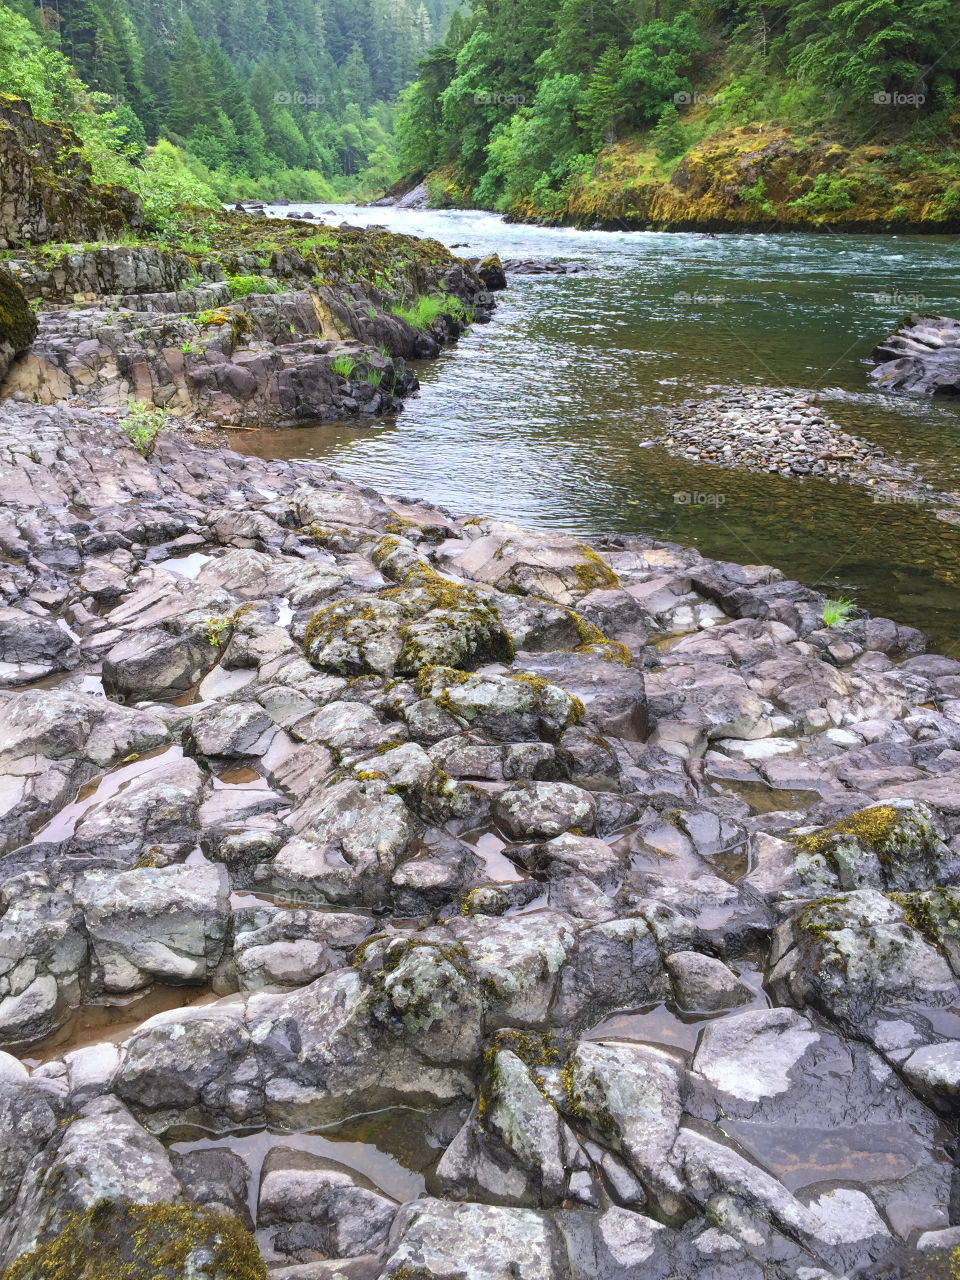 The rugged river banks made from textured hardened lava rock of the fast flowing Umpqua River in Southwestern Oregon. 